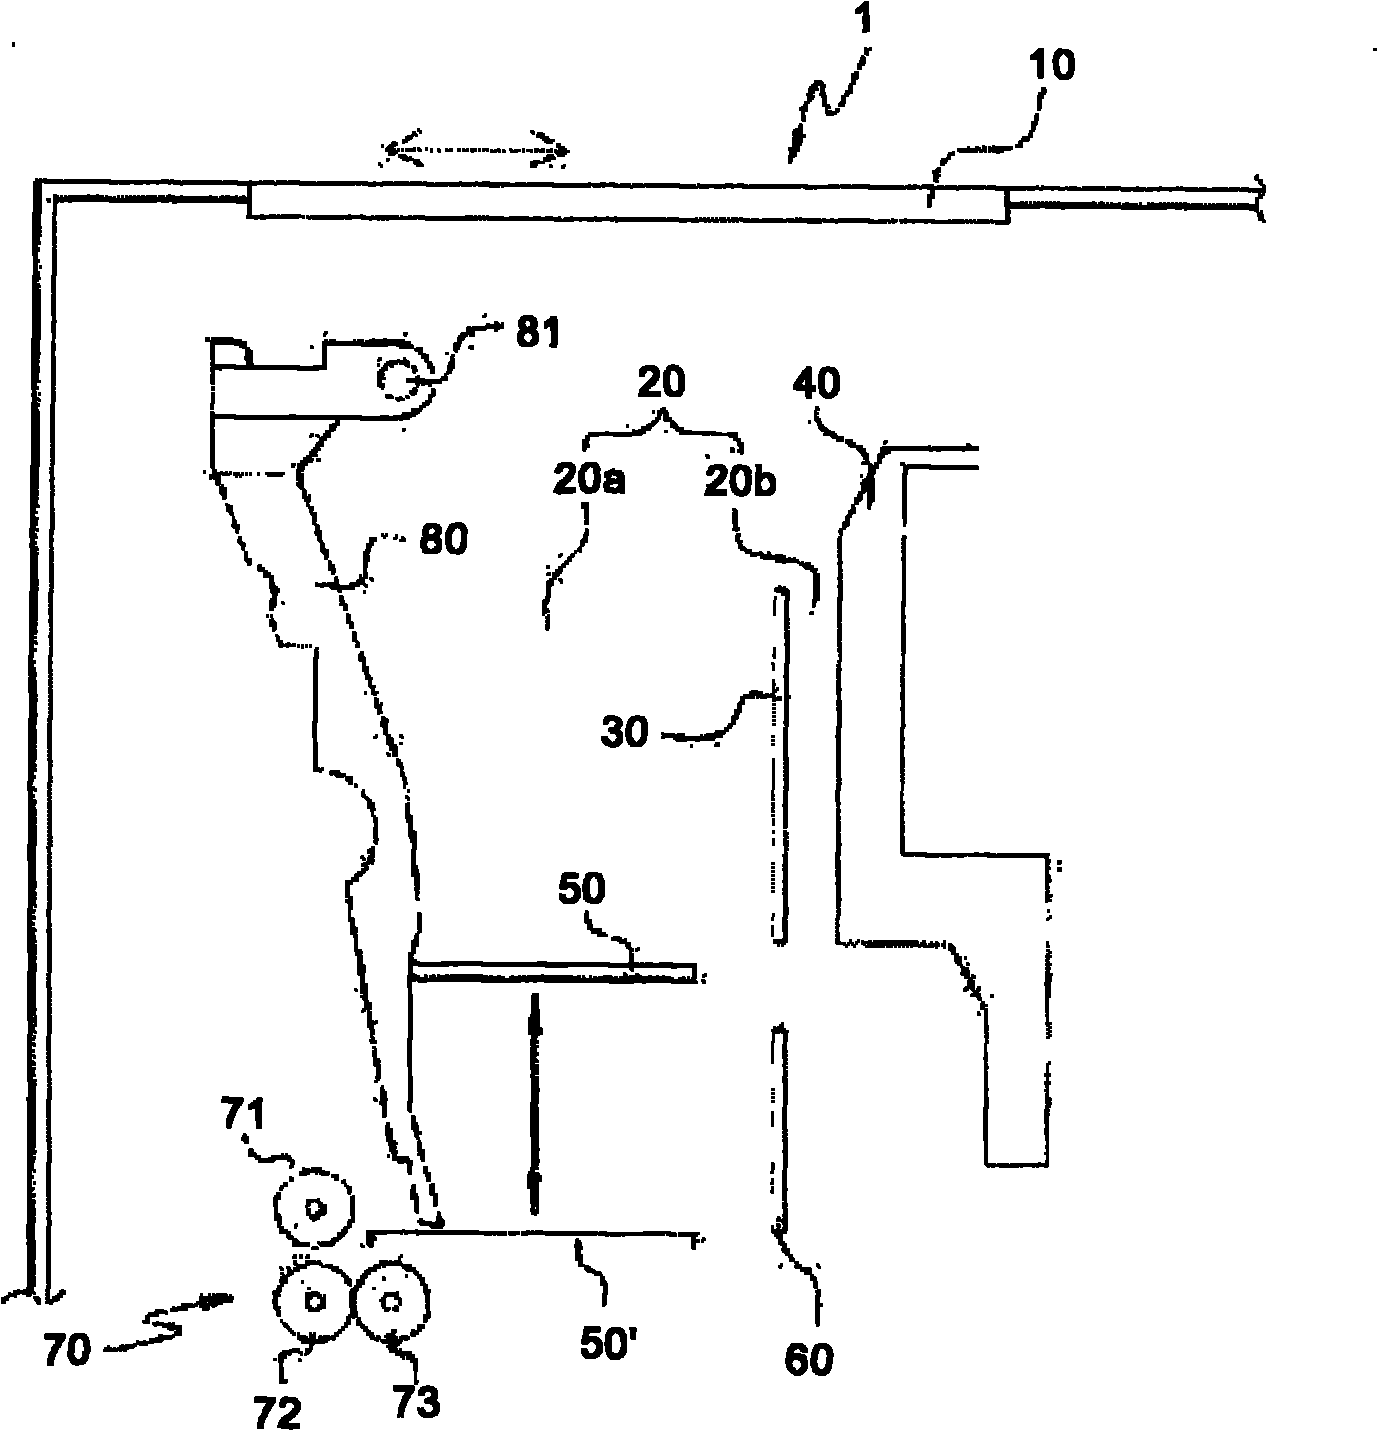 Paper money deposit and withdrawal device for an automated teller machine